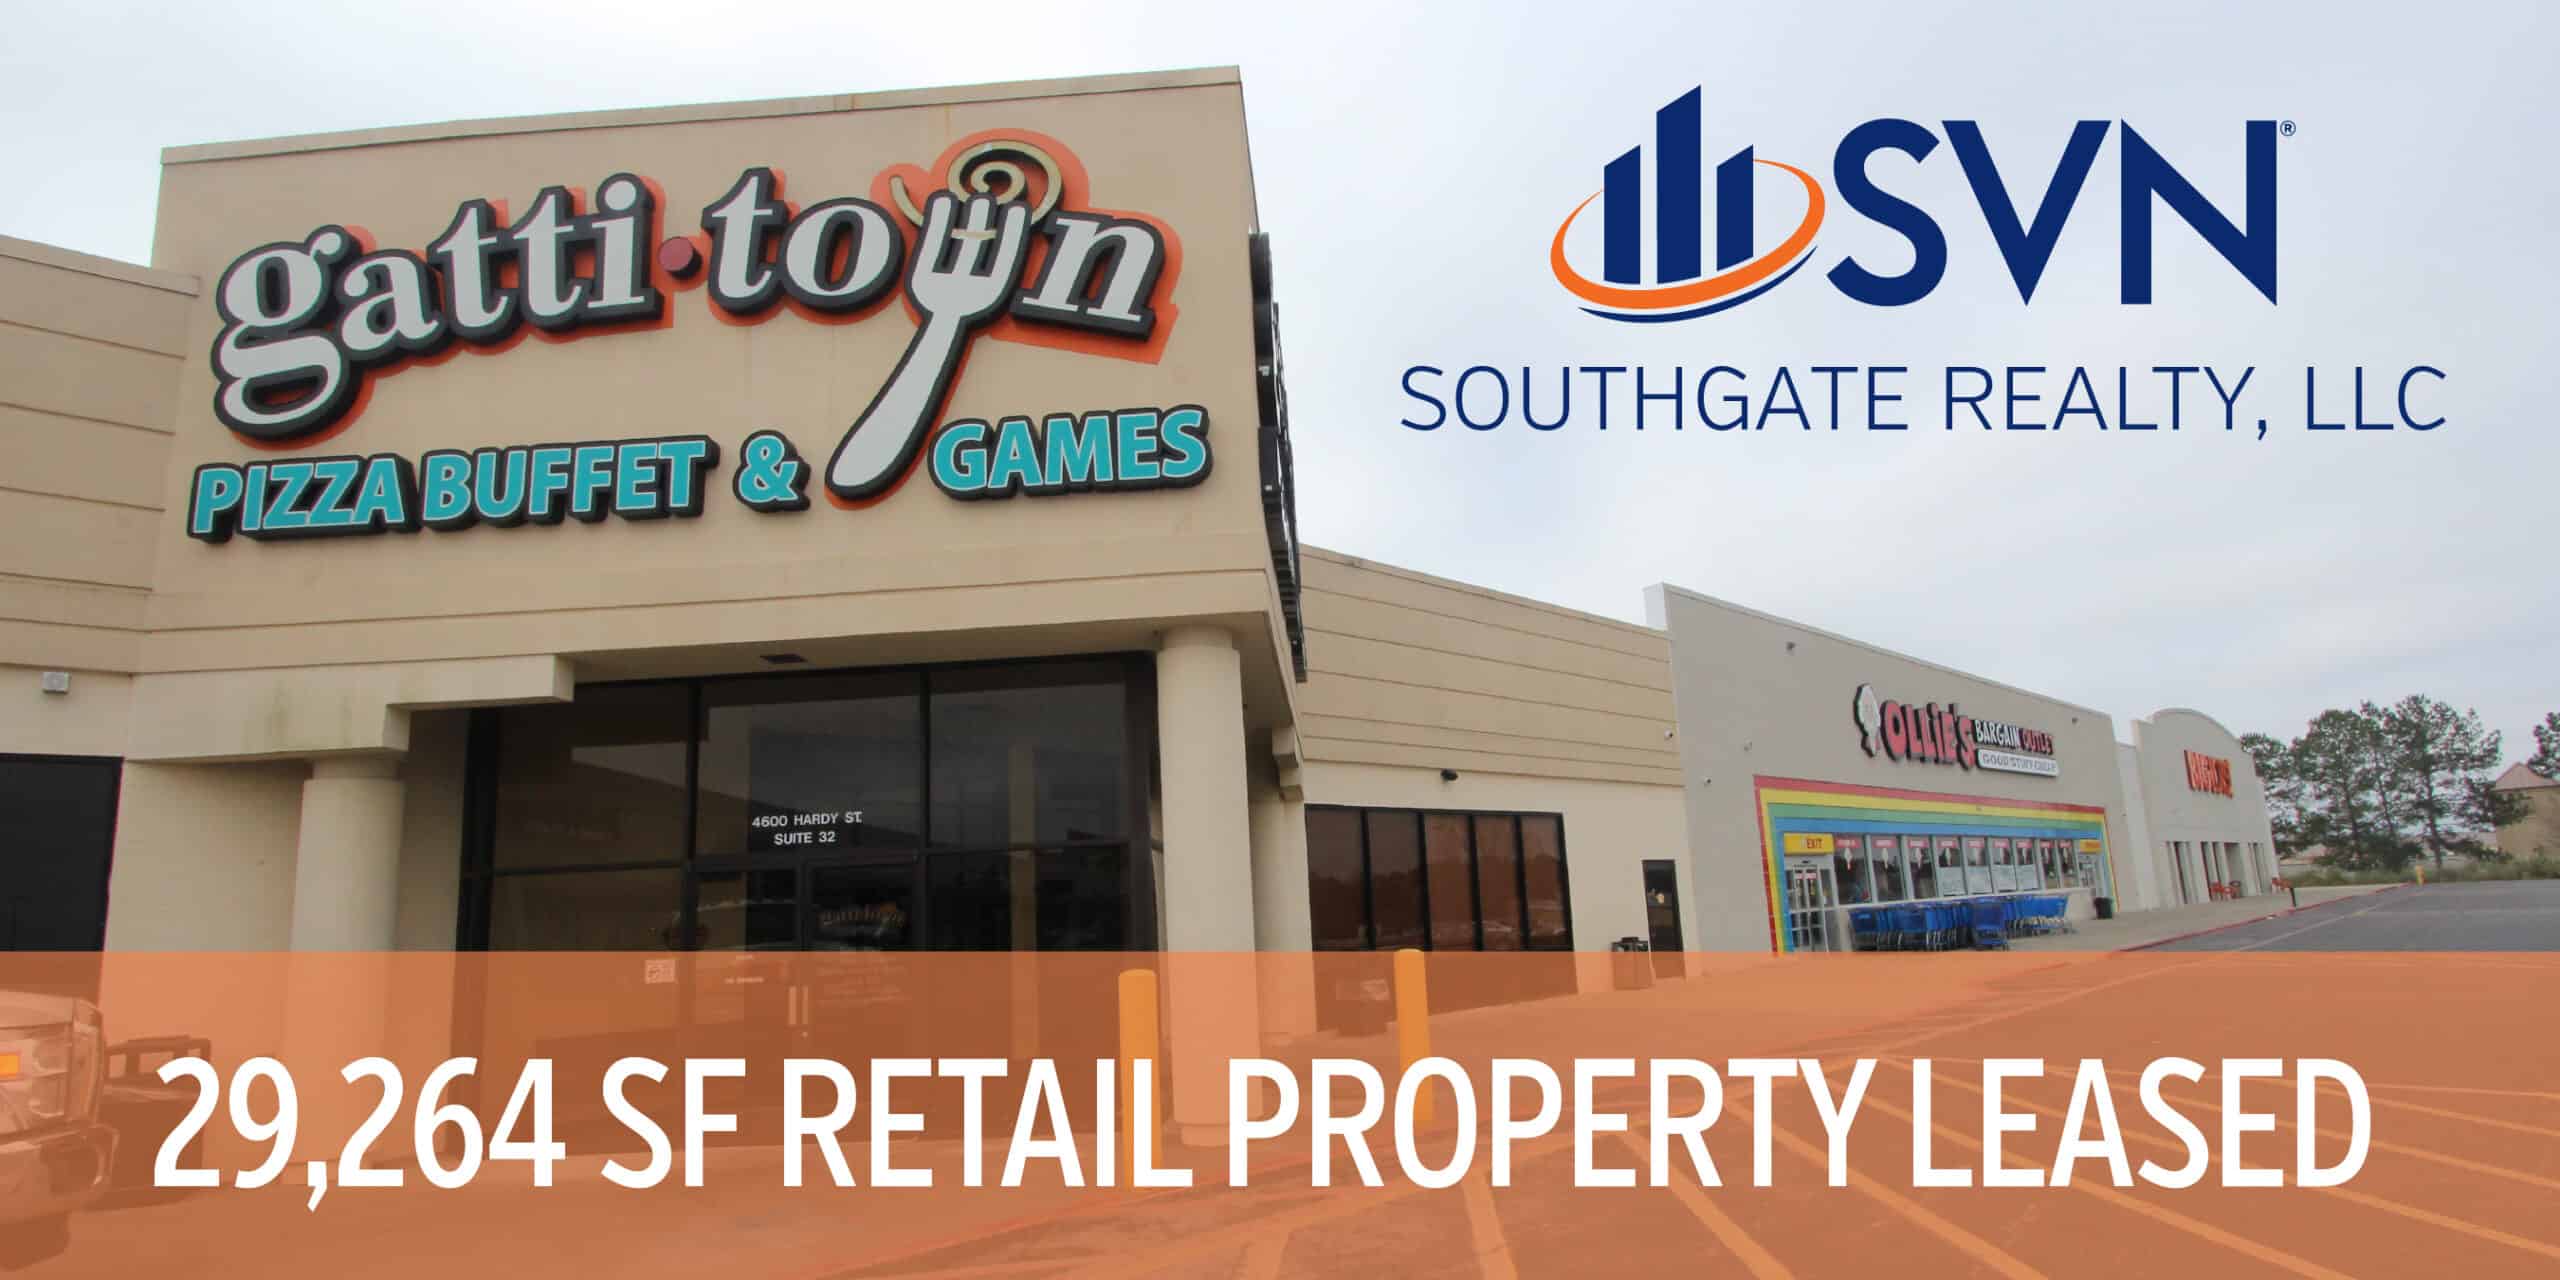 SVN | Southgate Realty, LLC Closes 29K+ SF Lease